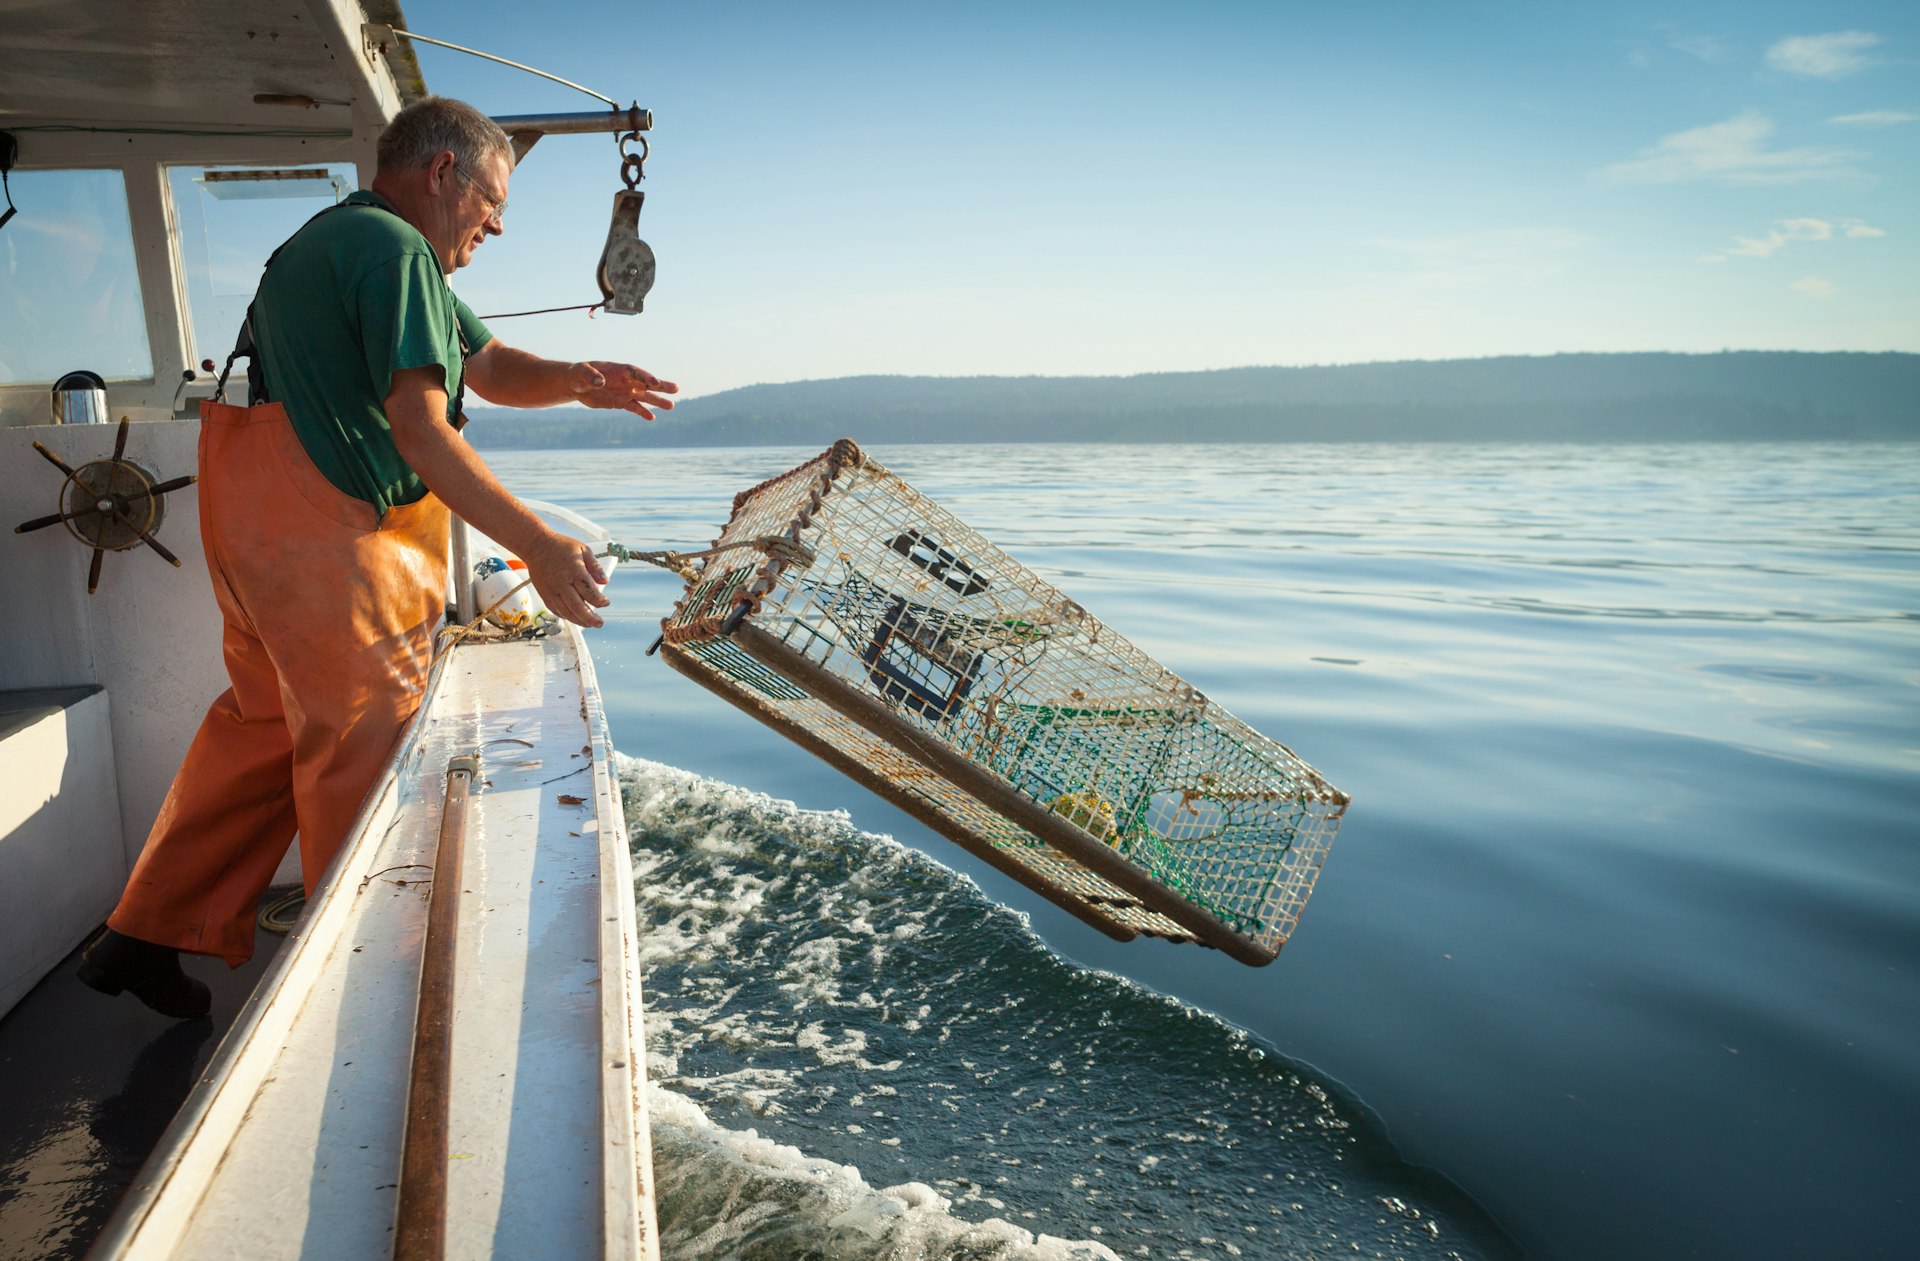 A man throws a lobster cage off the side of a boat out at sea near the Maine coast